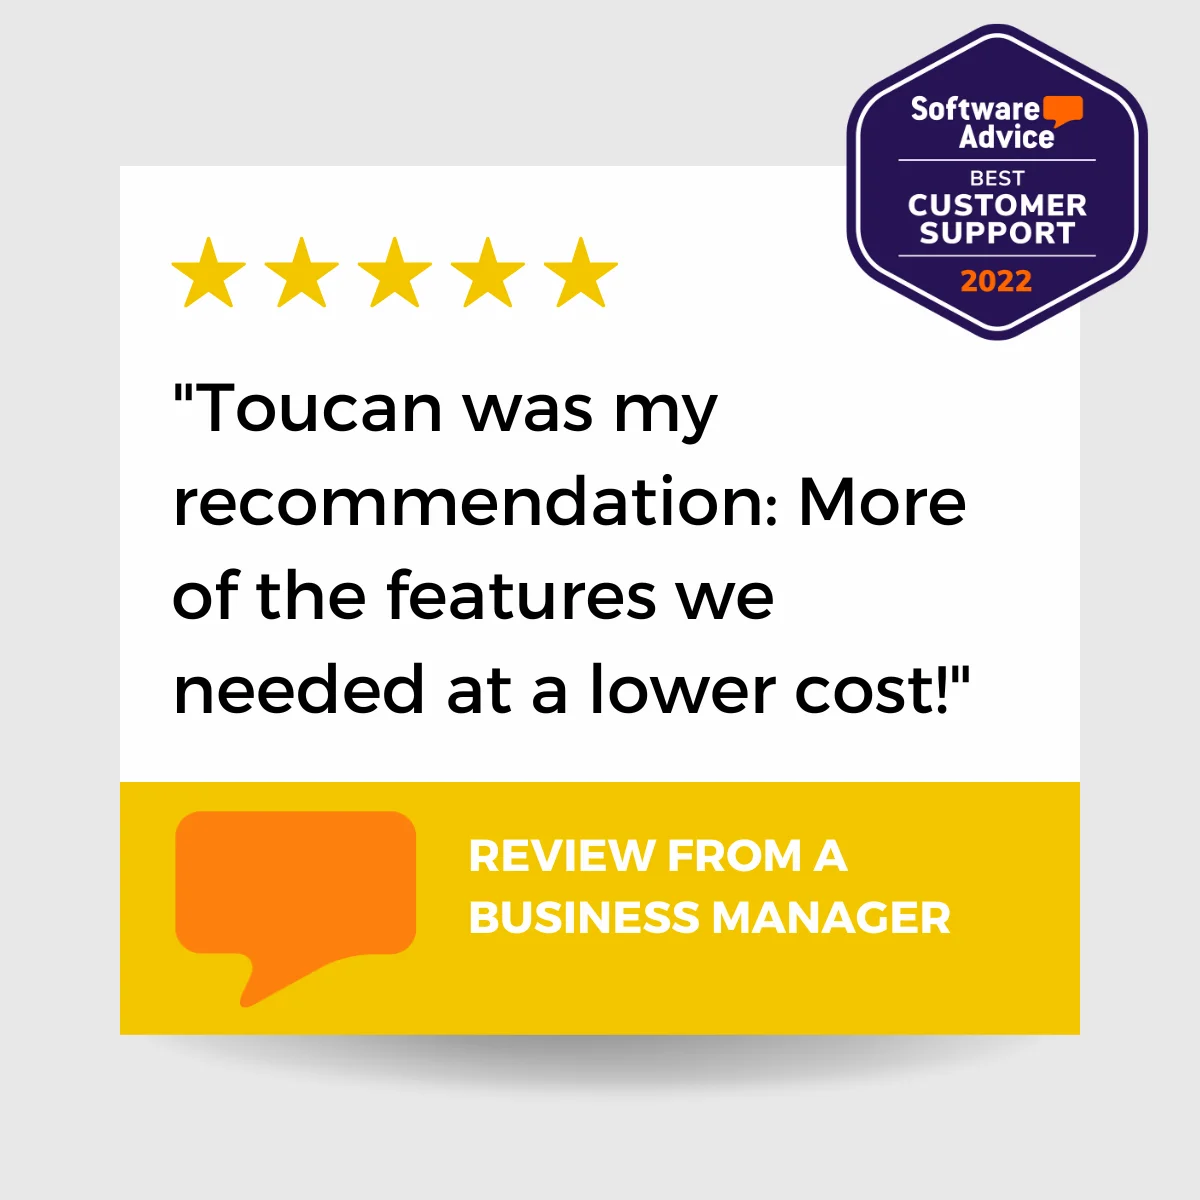 Toucan tool Software Advice Review